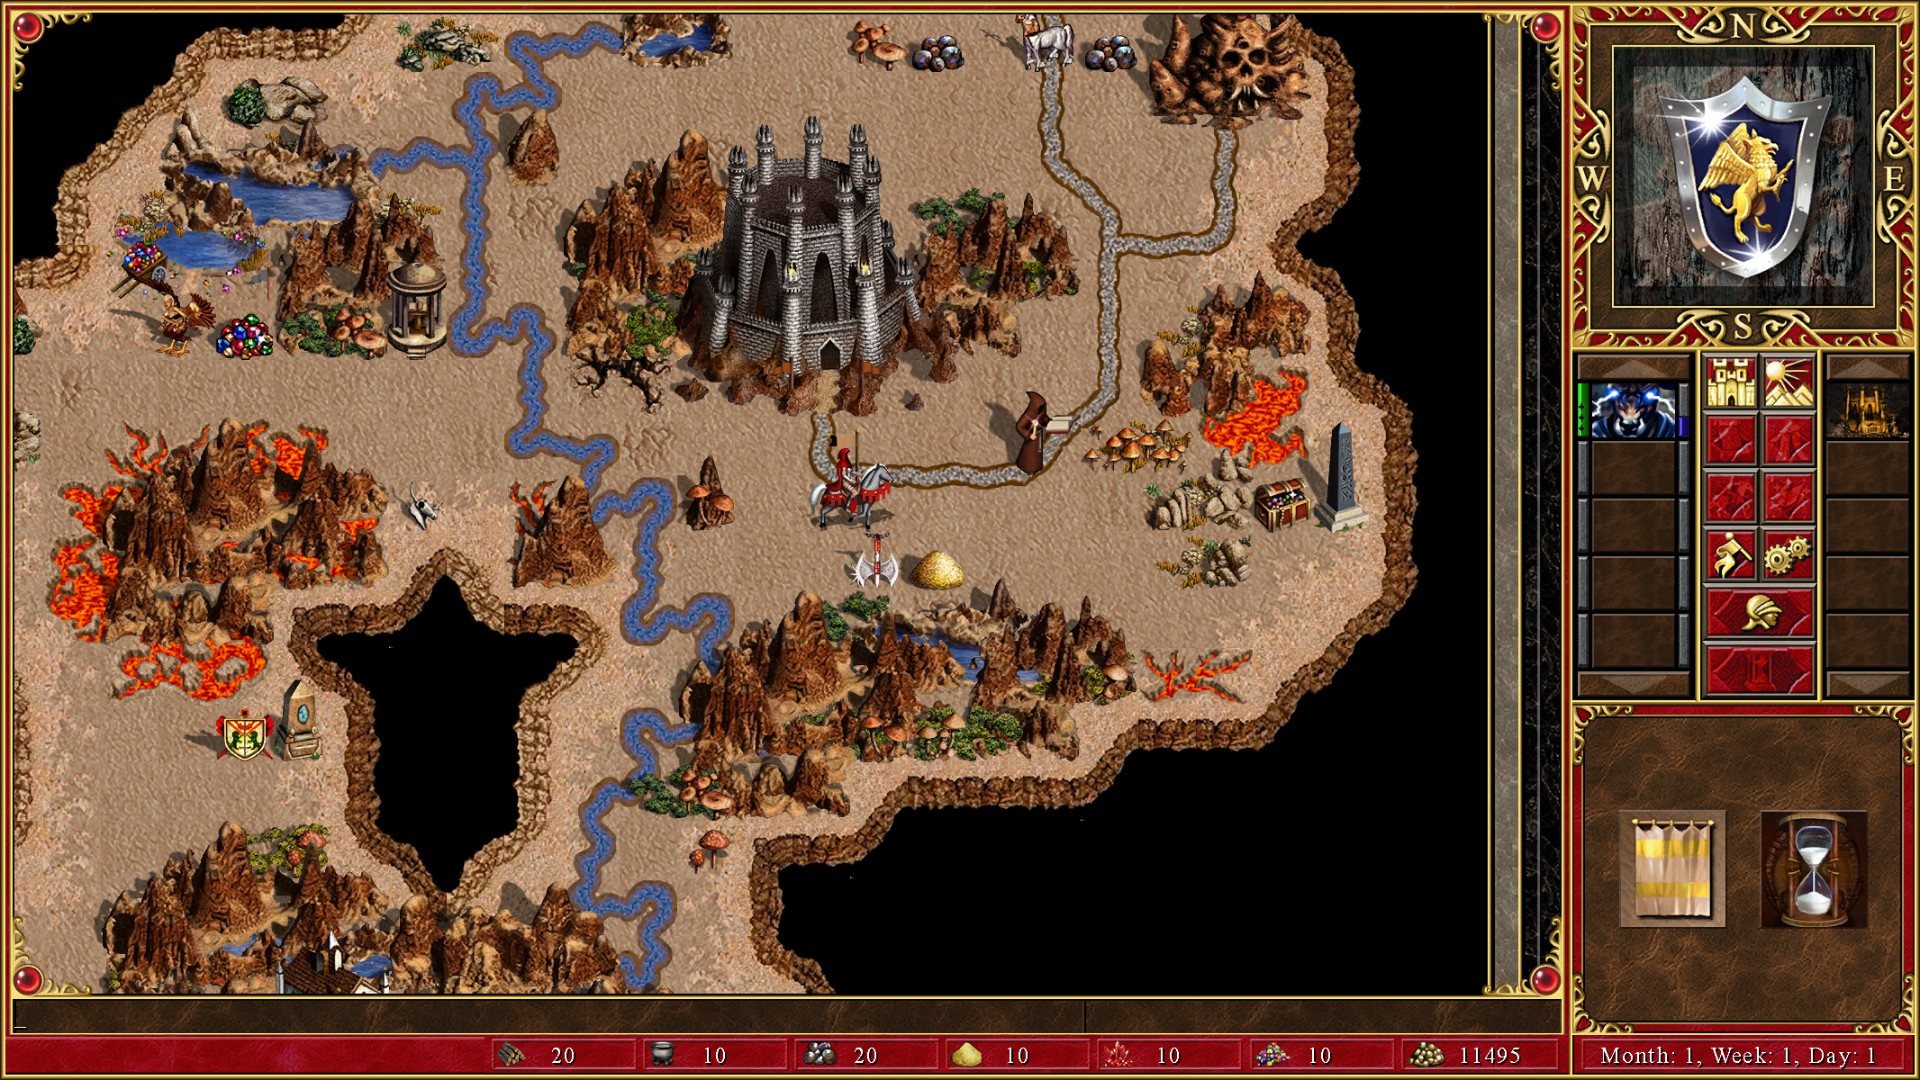 steam heroes of might and magic 3